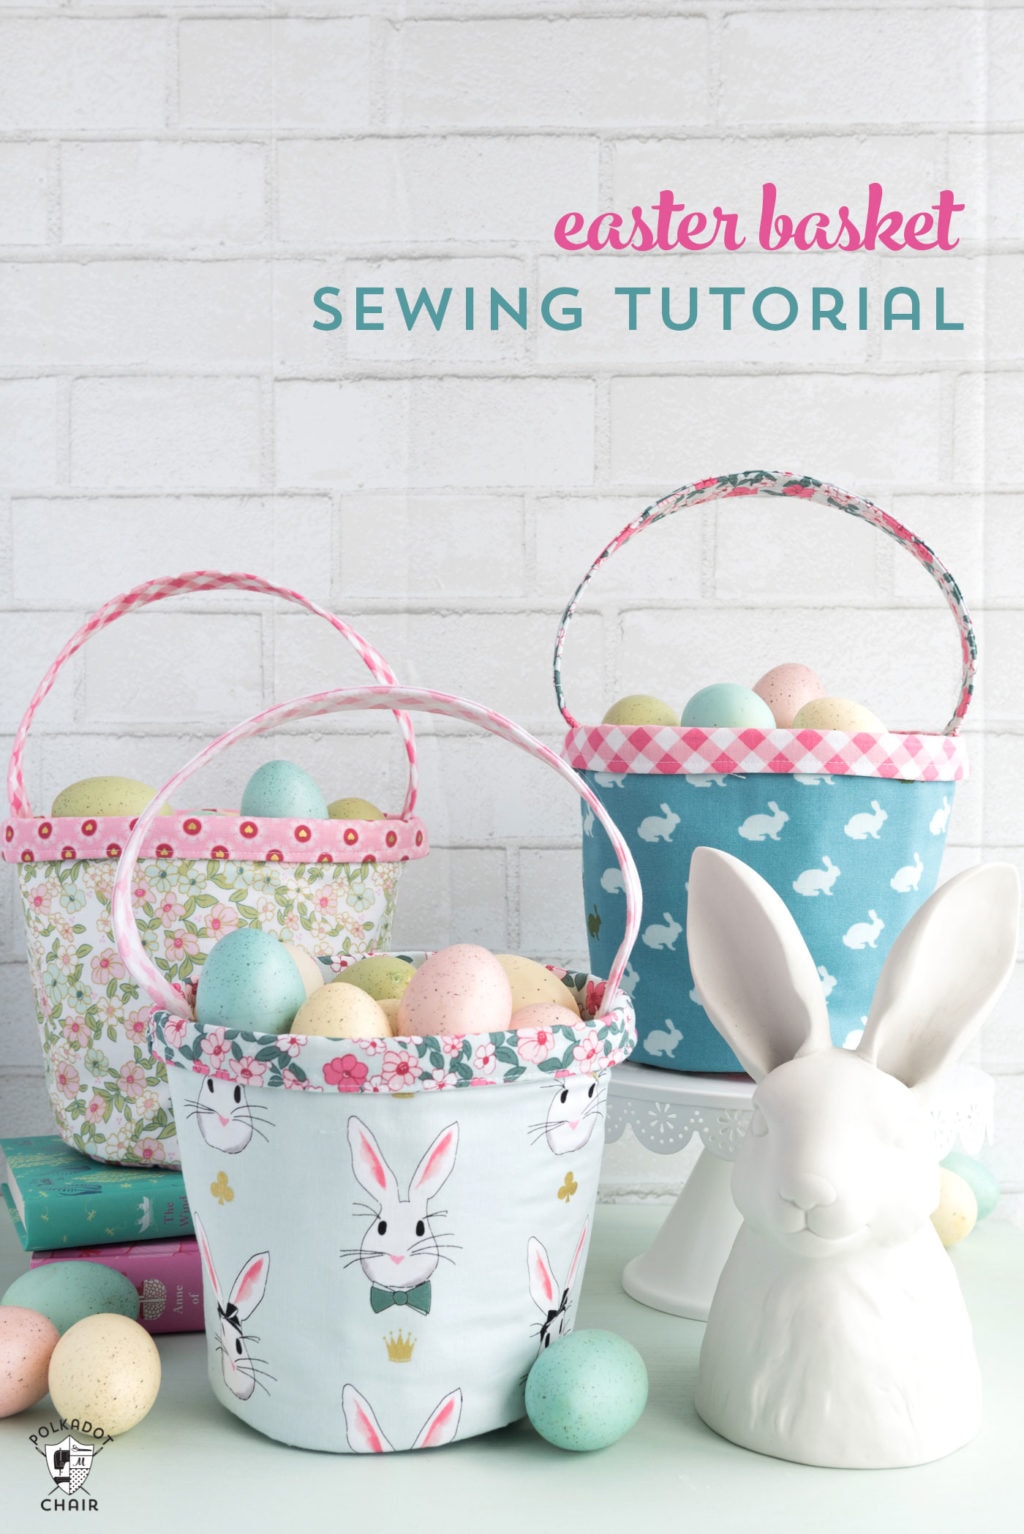 Three sewn Easter baskets, one with a flower pattern, one with bunny pattern faces, and lastly one that's blue with white bunny pattern. all beside a large white decorative bunny. 